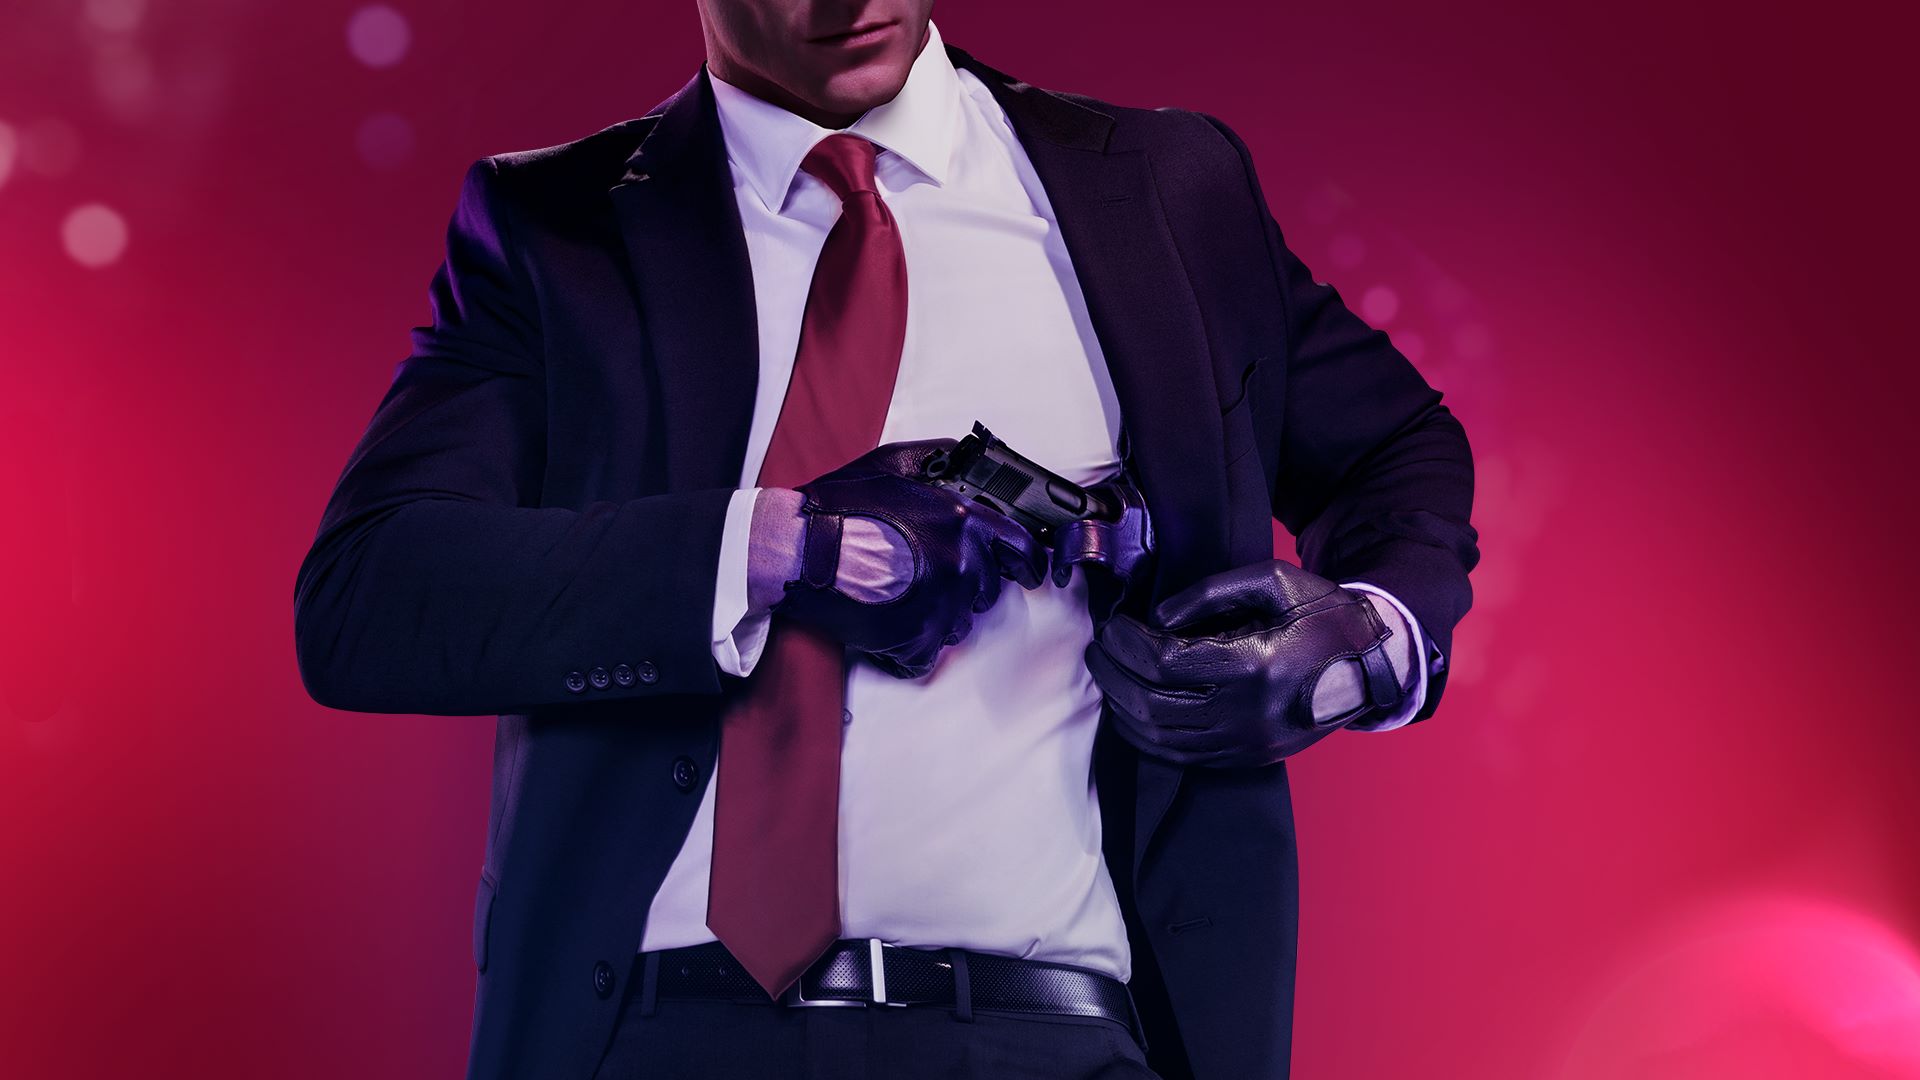 hitman 2 pc system requirements